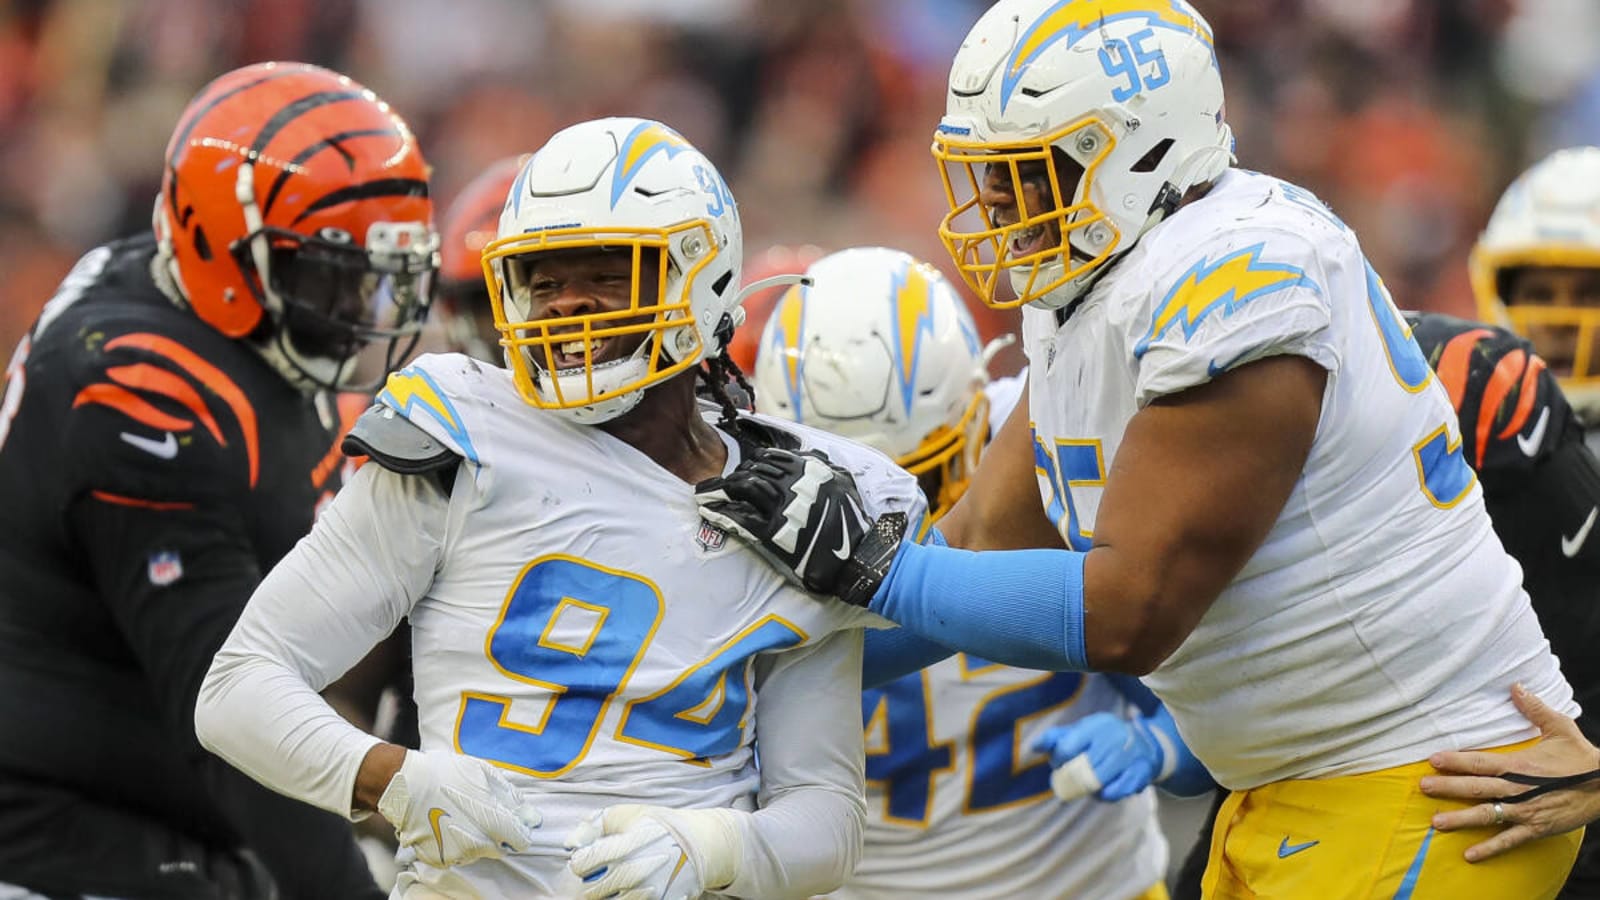 Chargers Injury Report: Bolts LB Out For Rest Of Season With Broken Foot